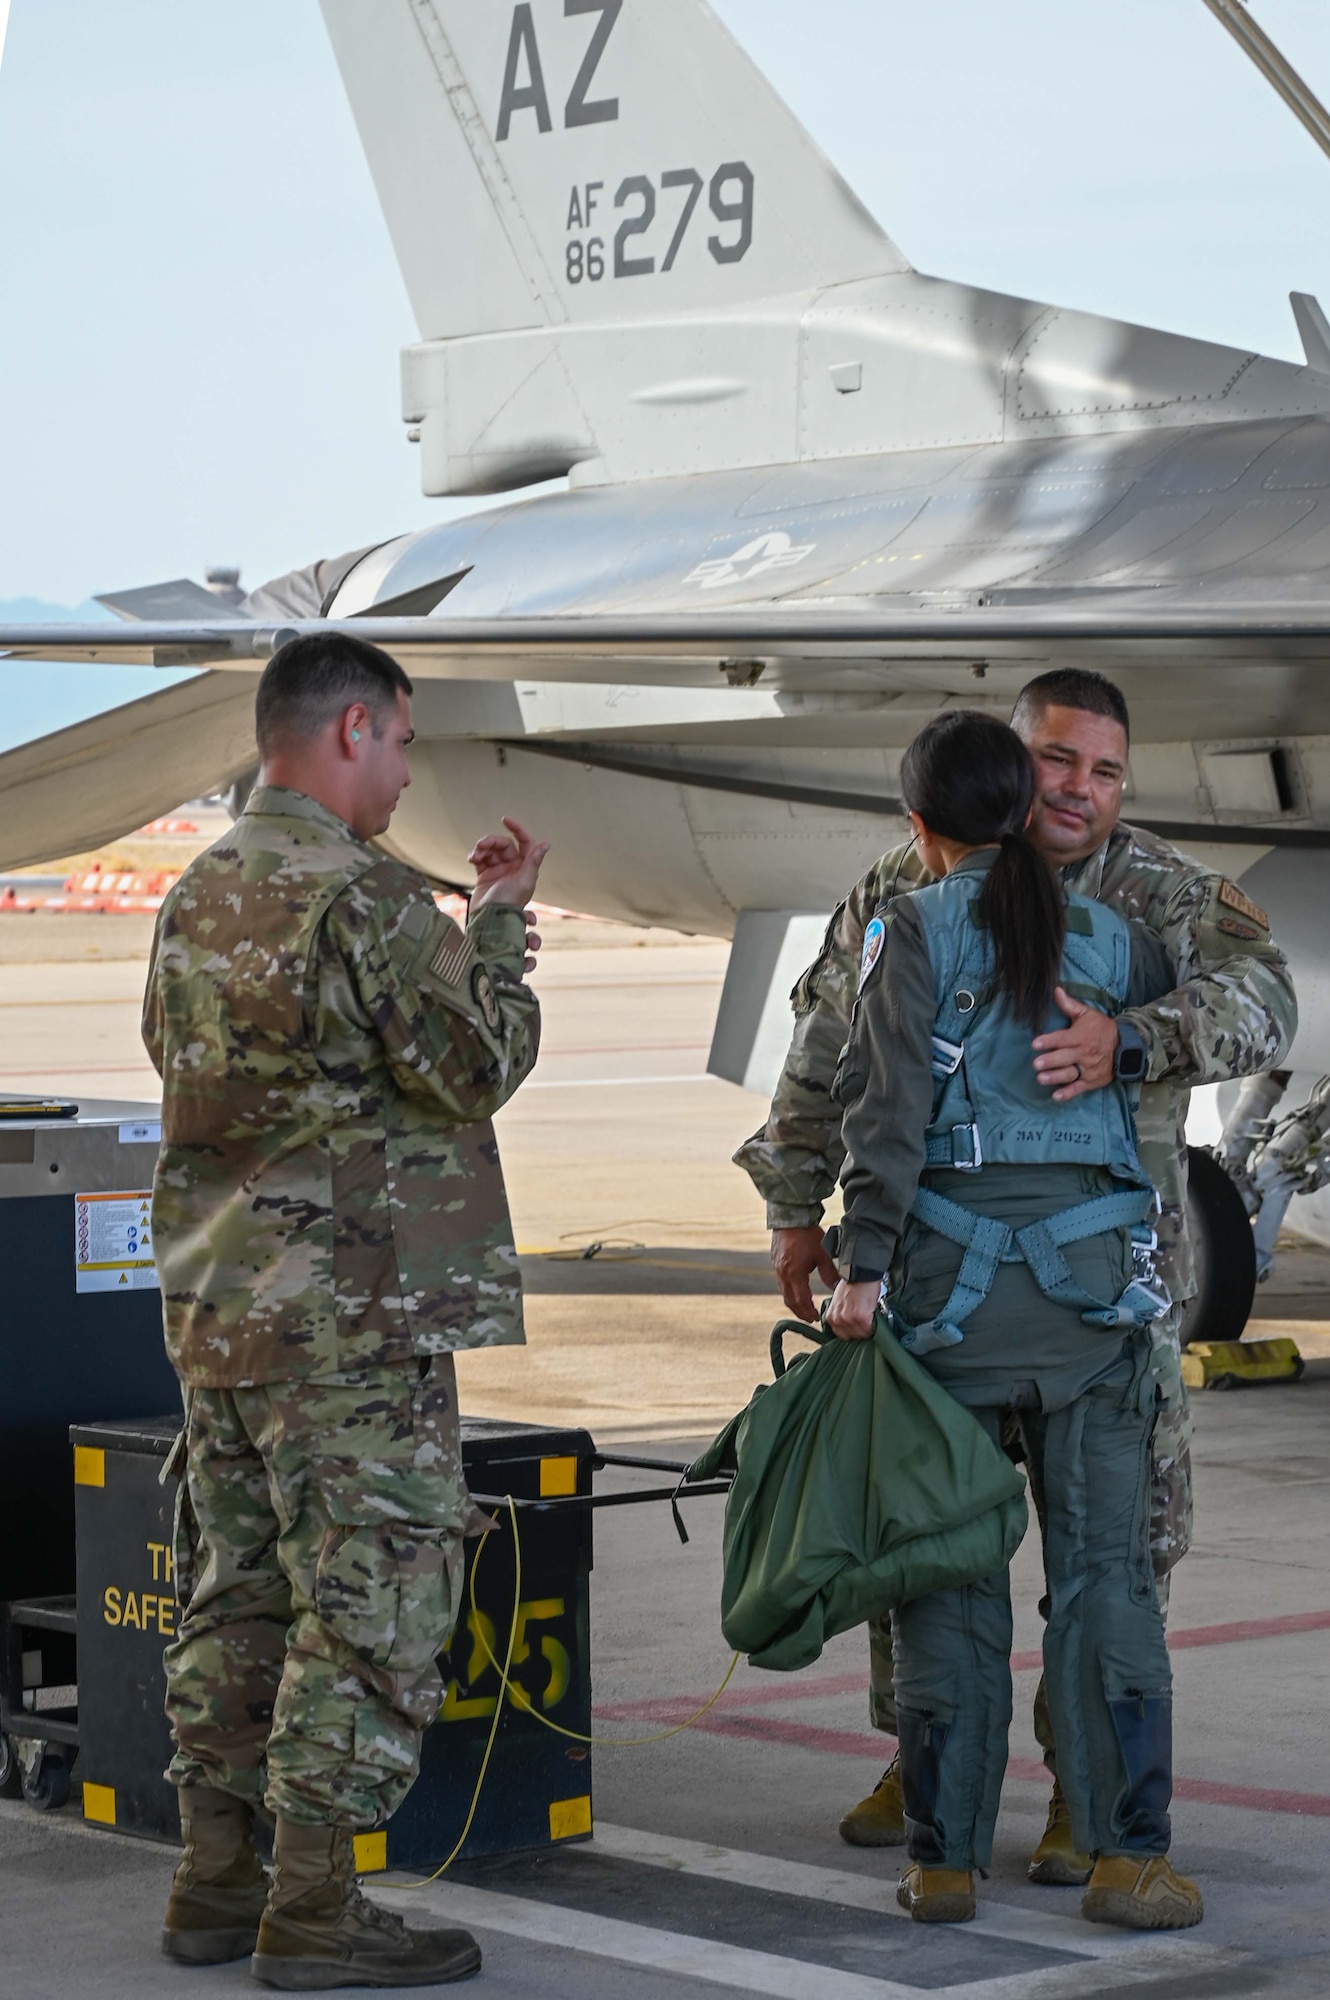 Senior Airman Raul Basurto III, an F-16 crew chief looks on as Master Sgt. Raul Basurto, Jr., 195th Fighter Squadron aircraft orndance systems supervisor, hugs his cousin, 1st Lt. Alyssa Majuta, before launching her on an F-16 training mission above the skies of southern Arizona. (U.S. Air National Guard photo by Maj. Angela Walz)